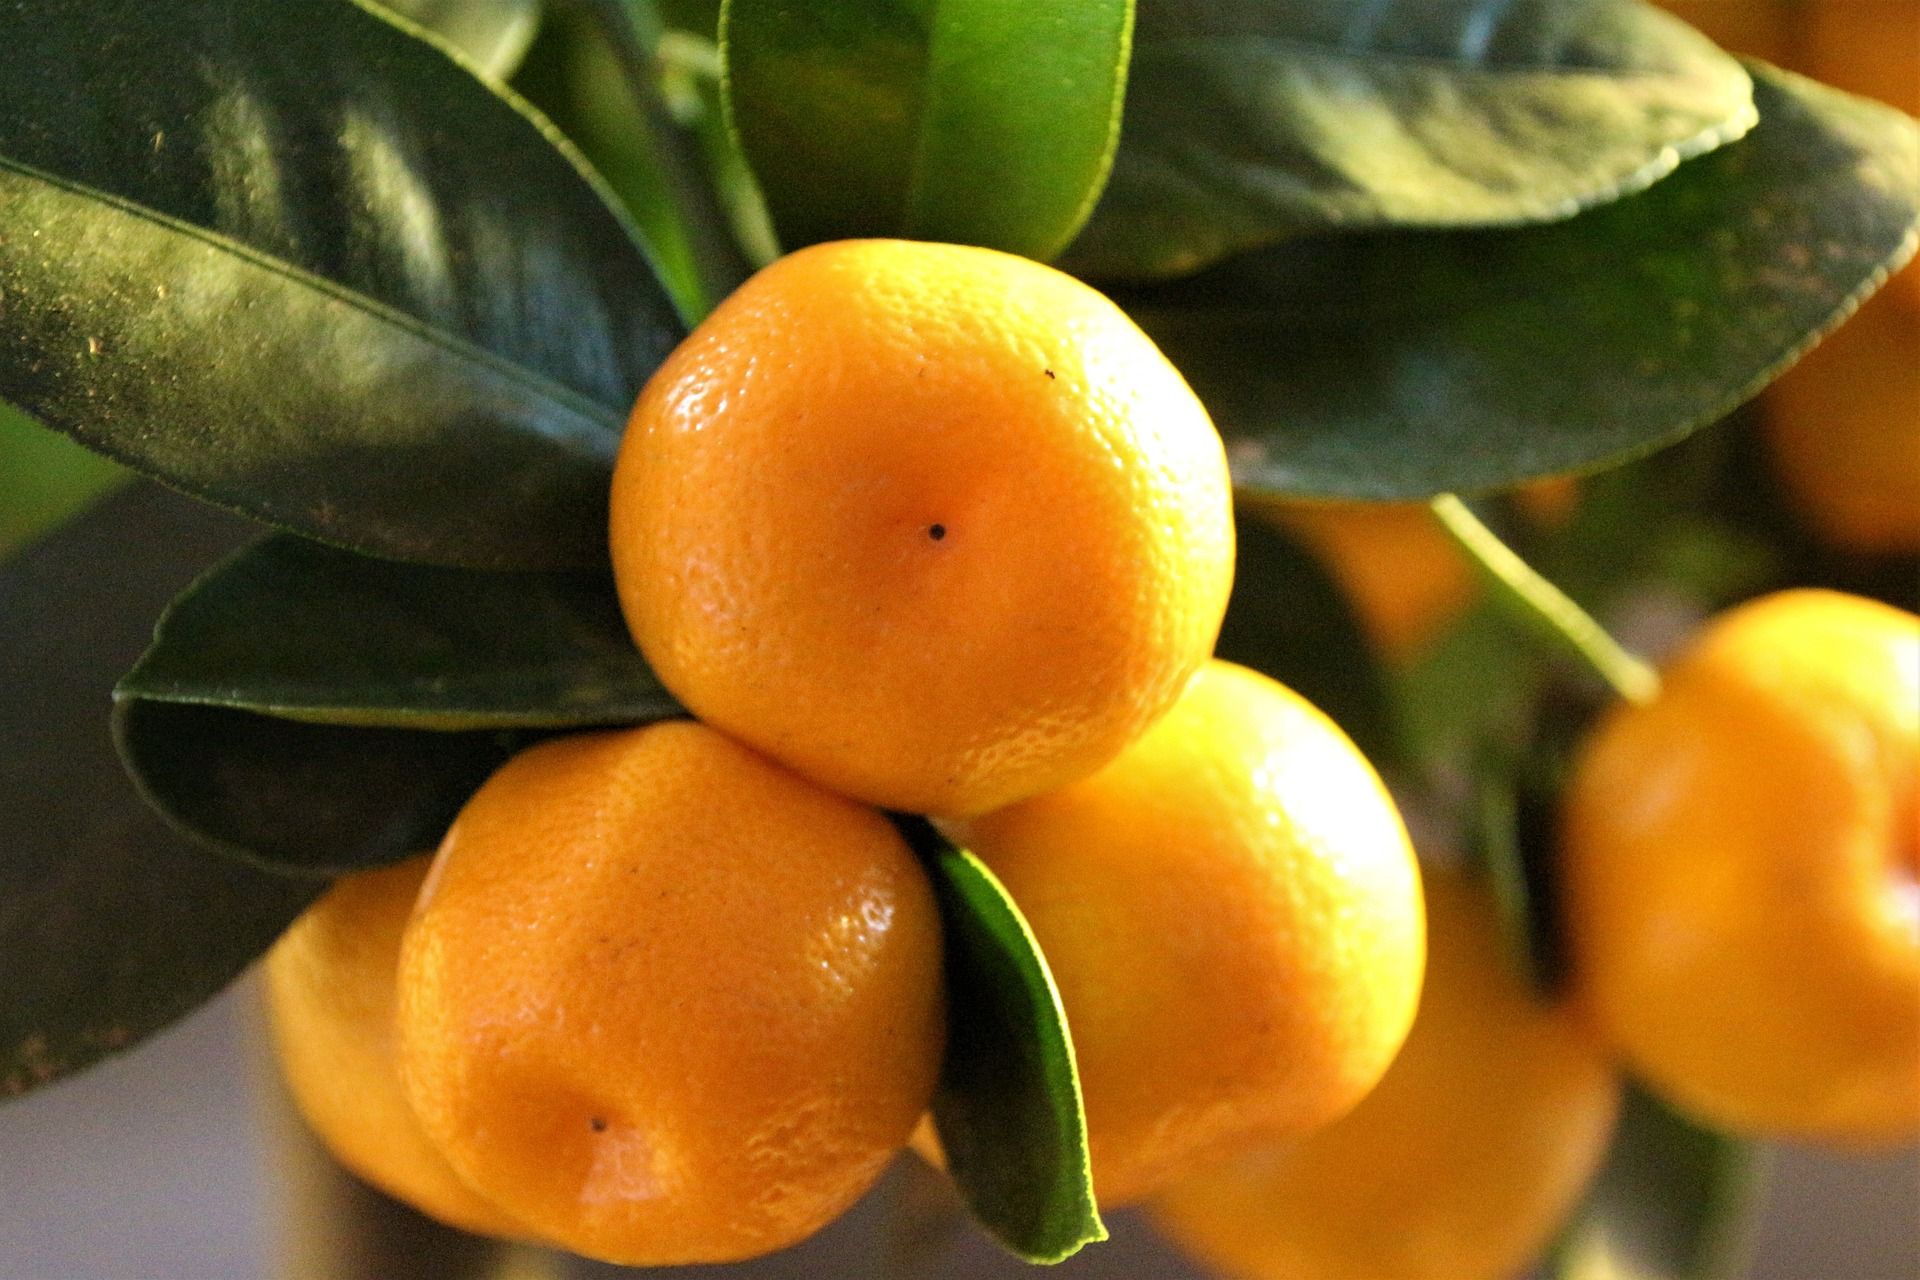 Growing Citrus Trees in USDA Zone 7: Tips and Tricks for Cold Hardy Fruit Production